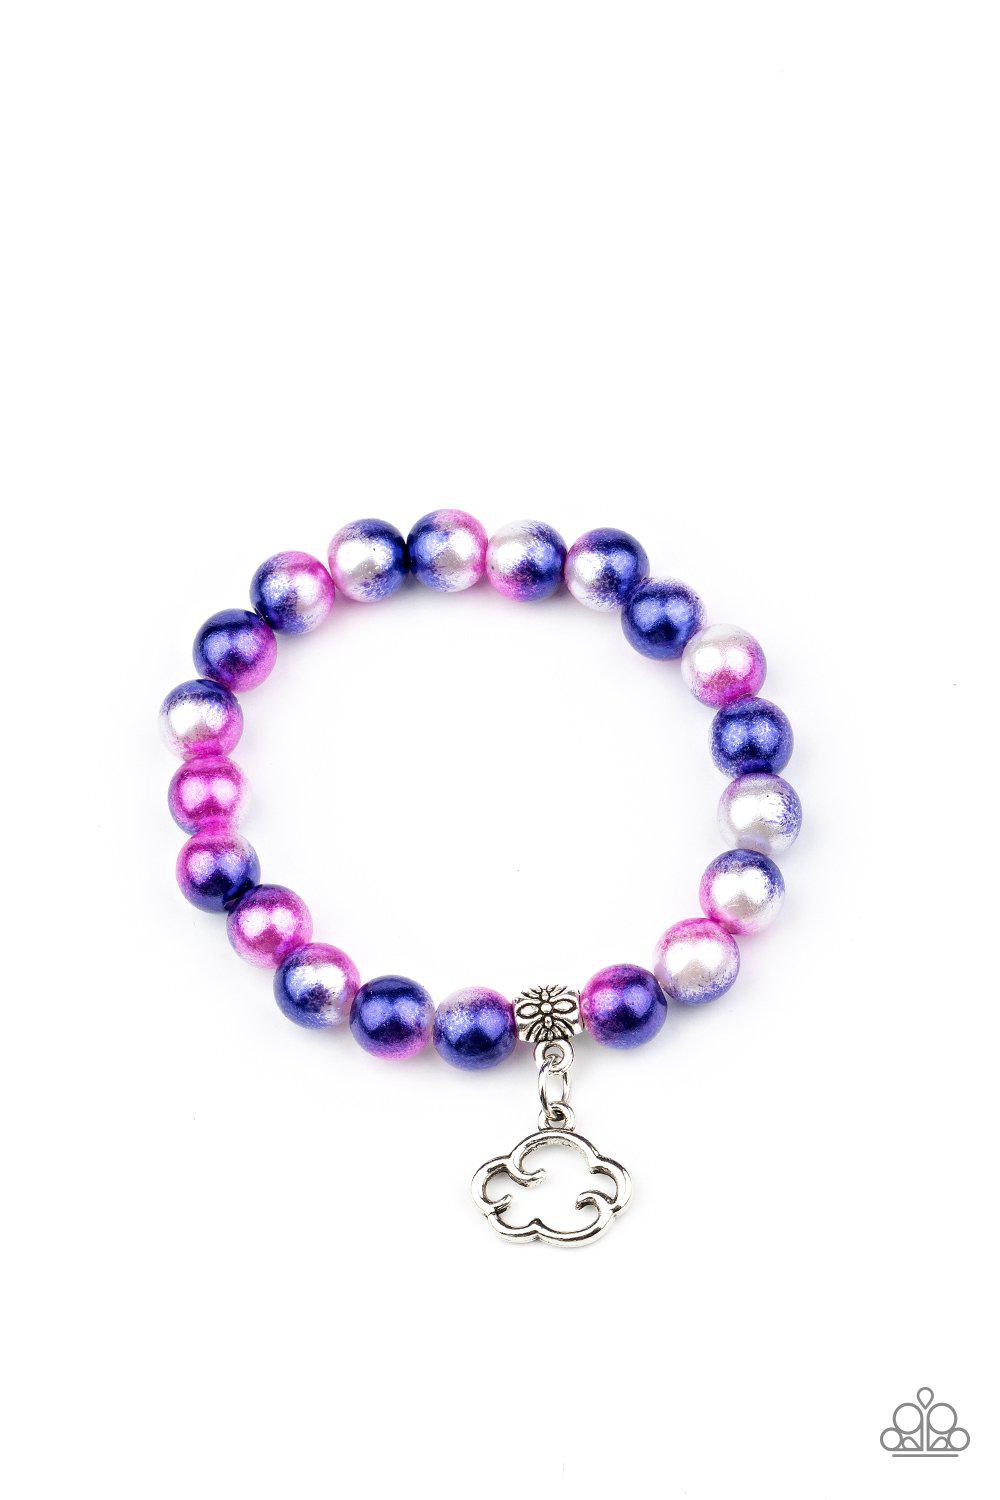 Starlet Shimmer Children&#39;s Cloud Charm Bracelets - Paparazzi Accessories (set of 5) - Full set -CarasShop.com - $5 Jewelry by Cara Jewels